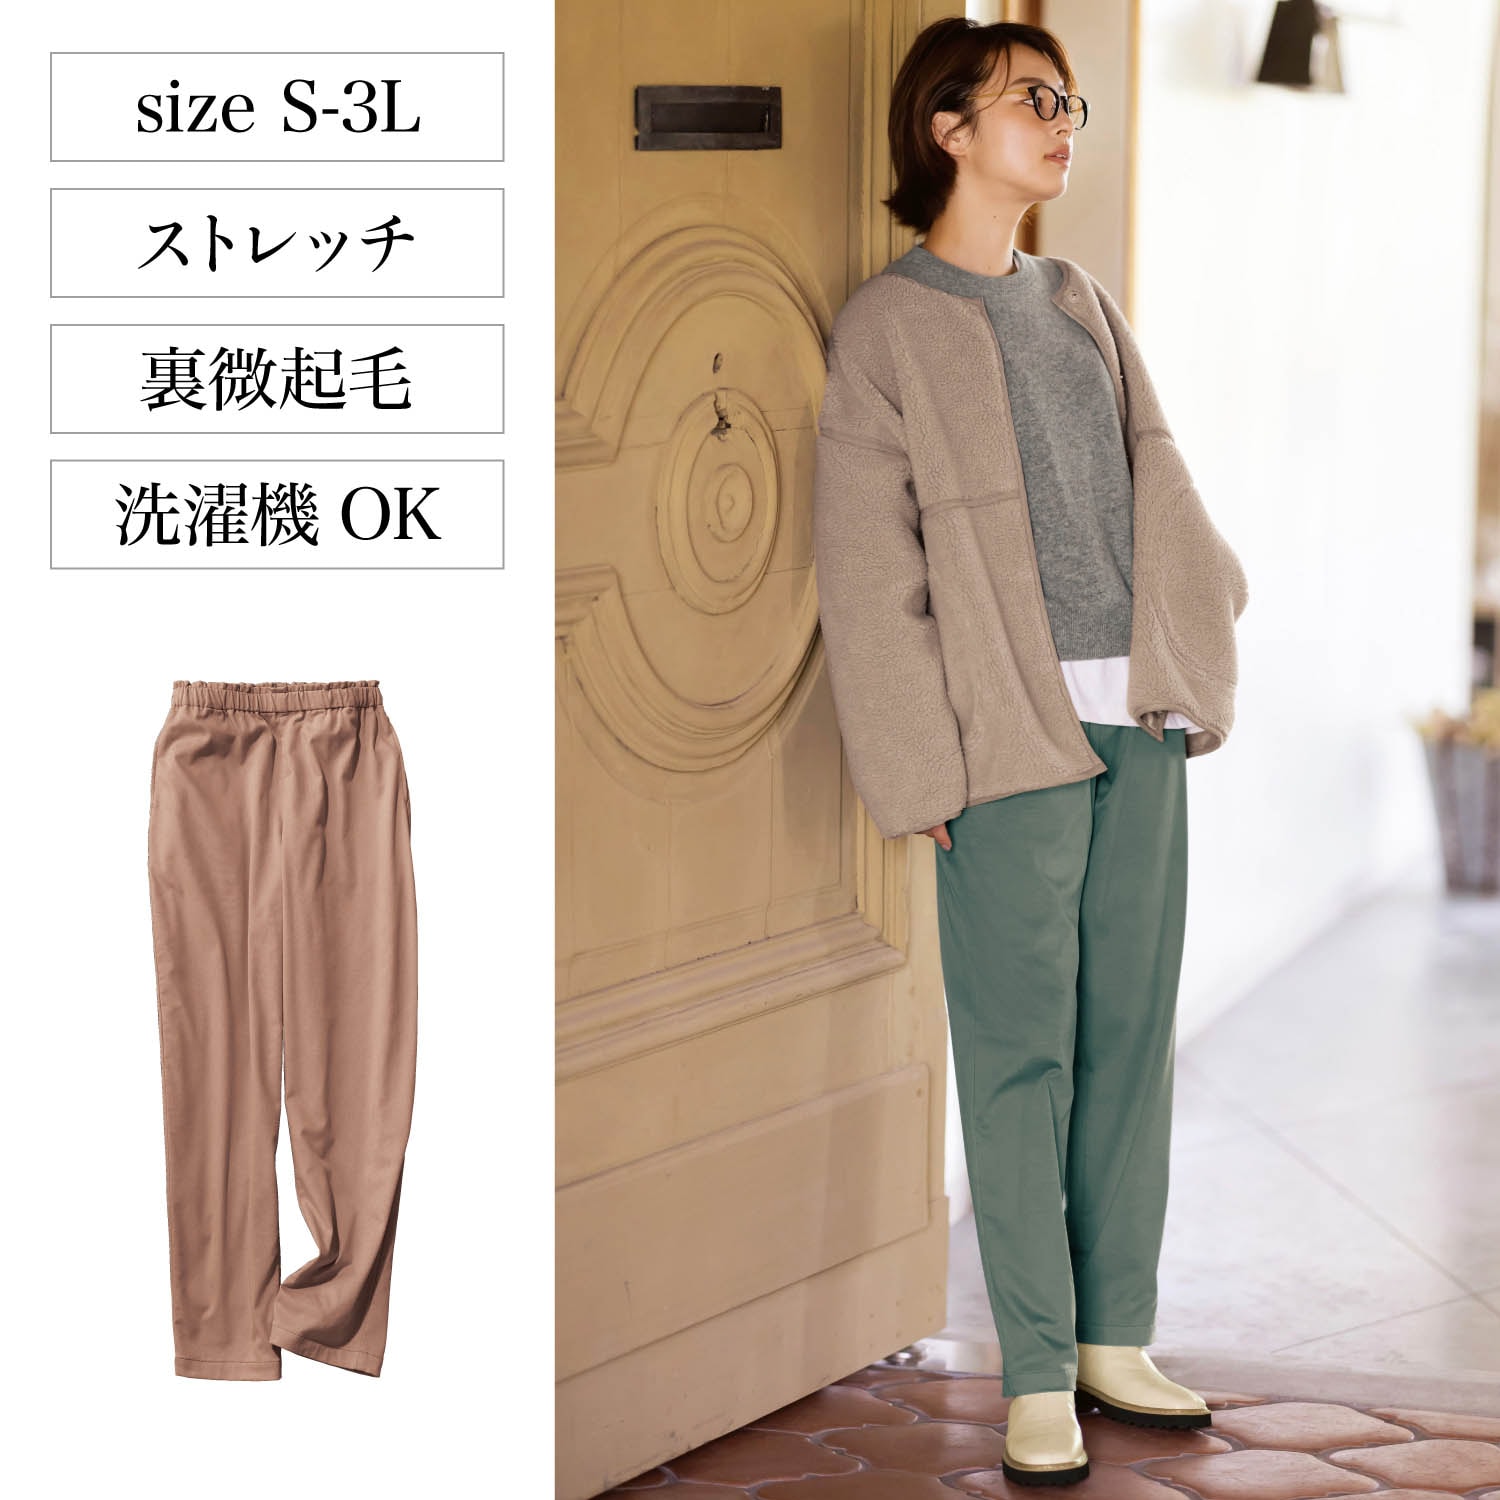 Reclaimed Womens Clothing Trousers Inspired 99 Flare in Brown Slacks and Chinos Harem pants vintage 